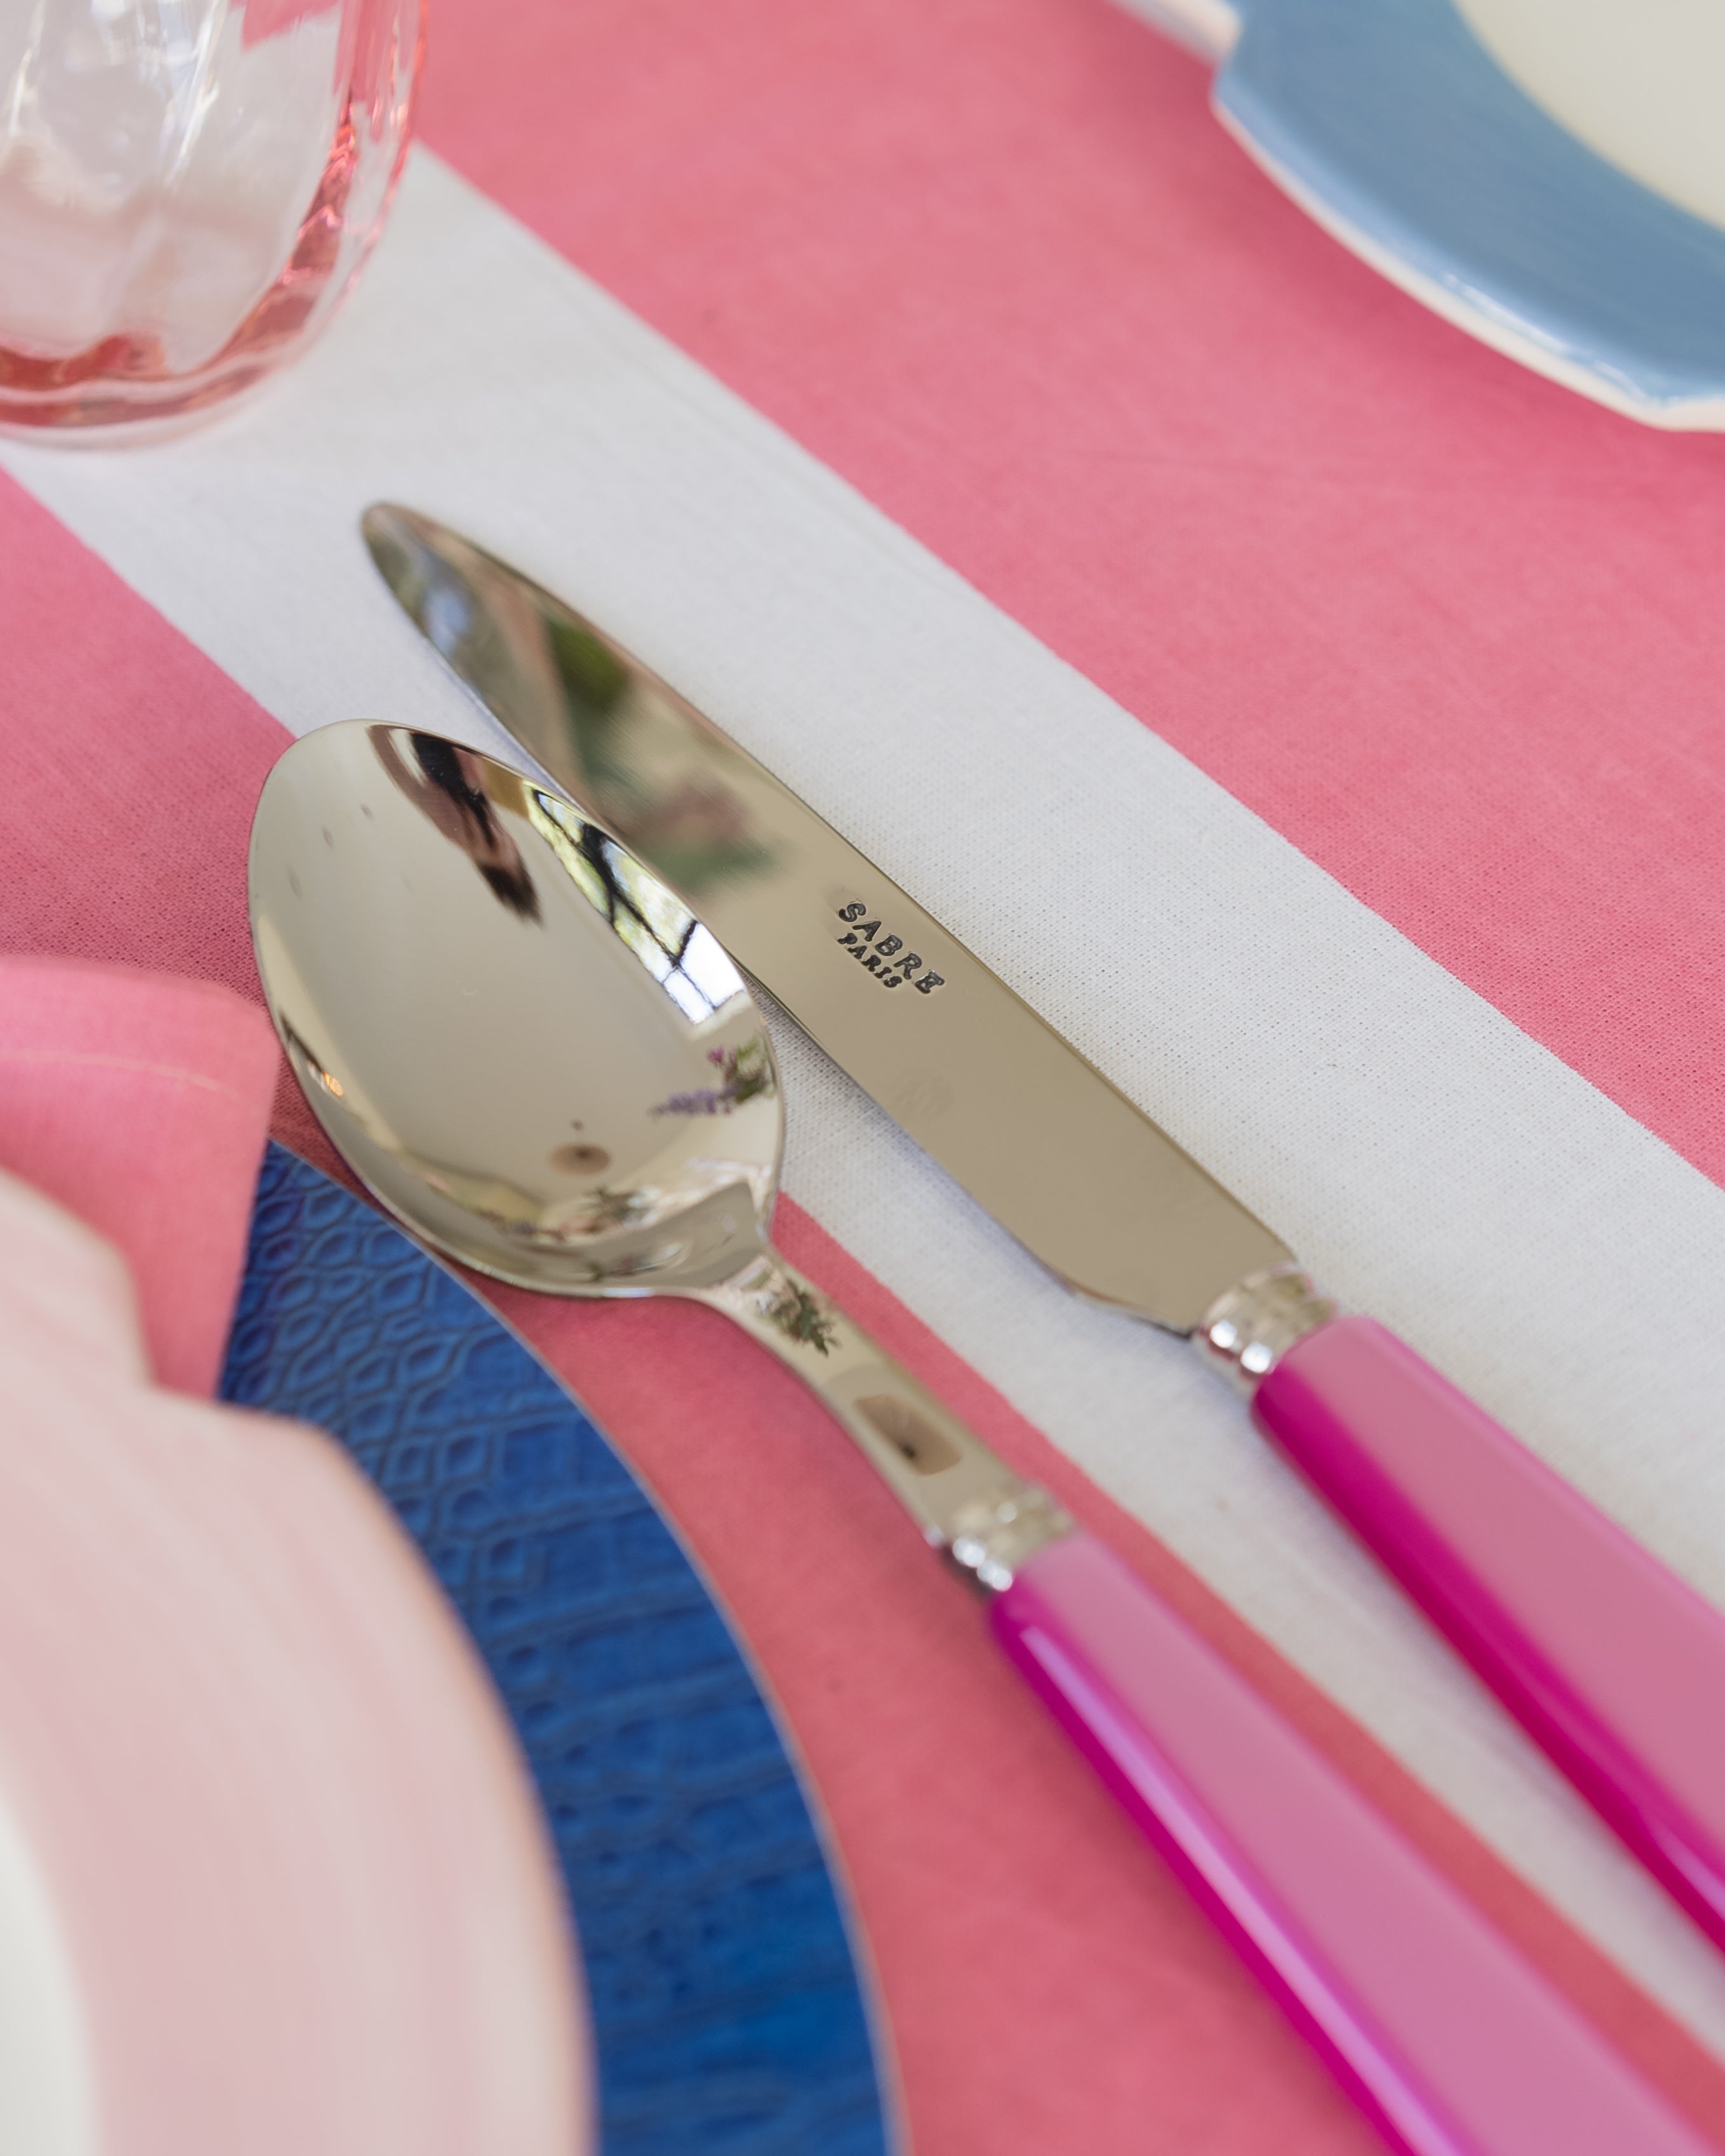 Sabre Icone pink dessert spoon and knife